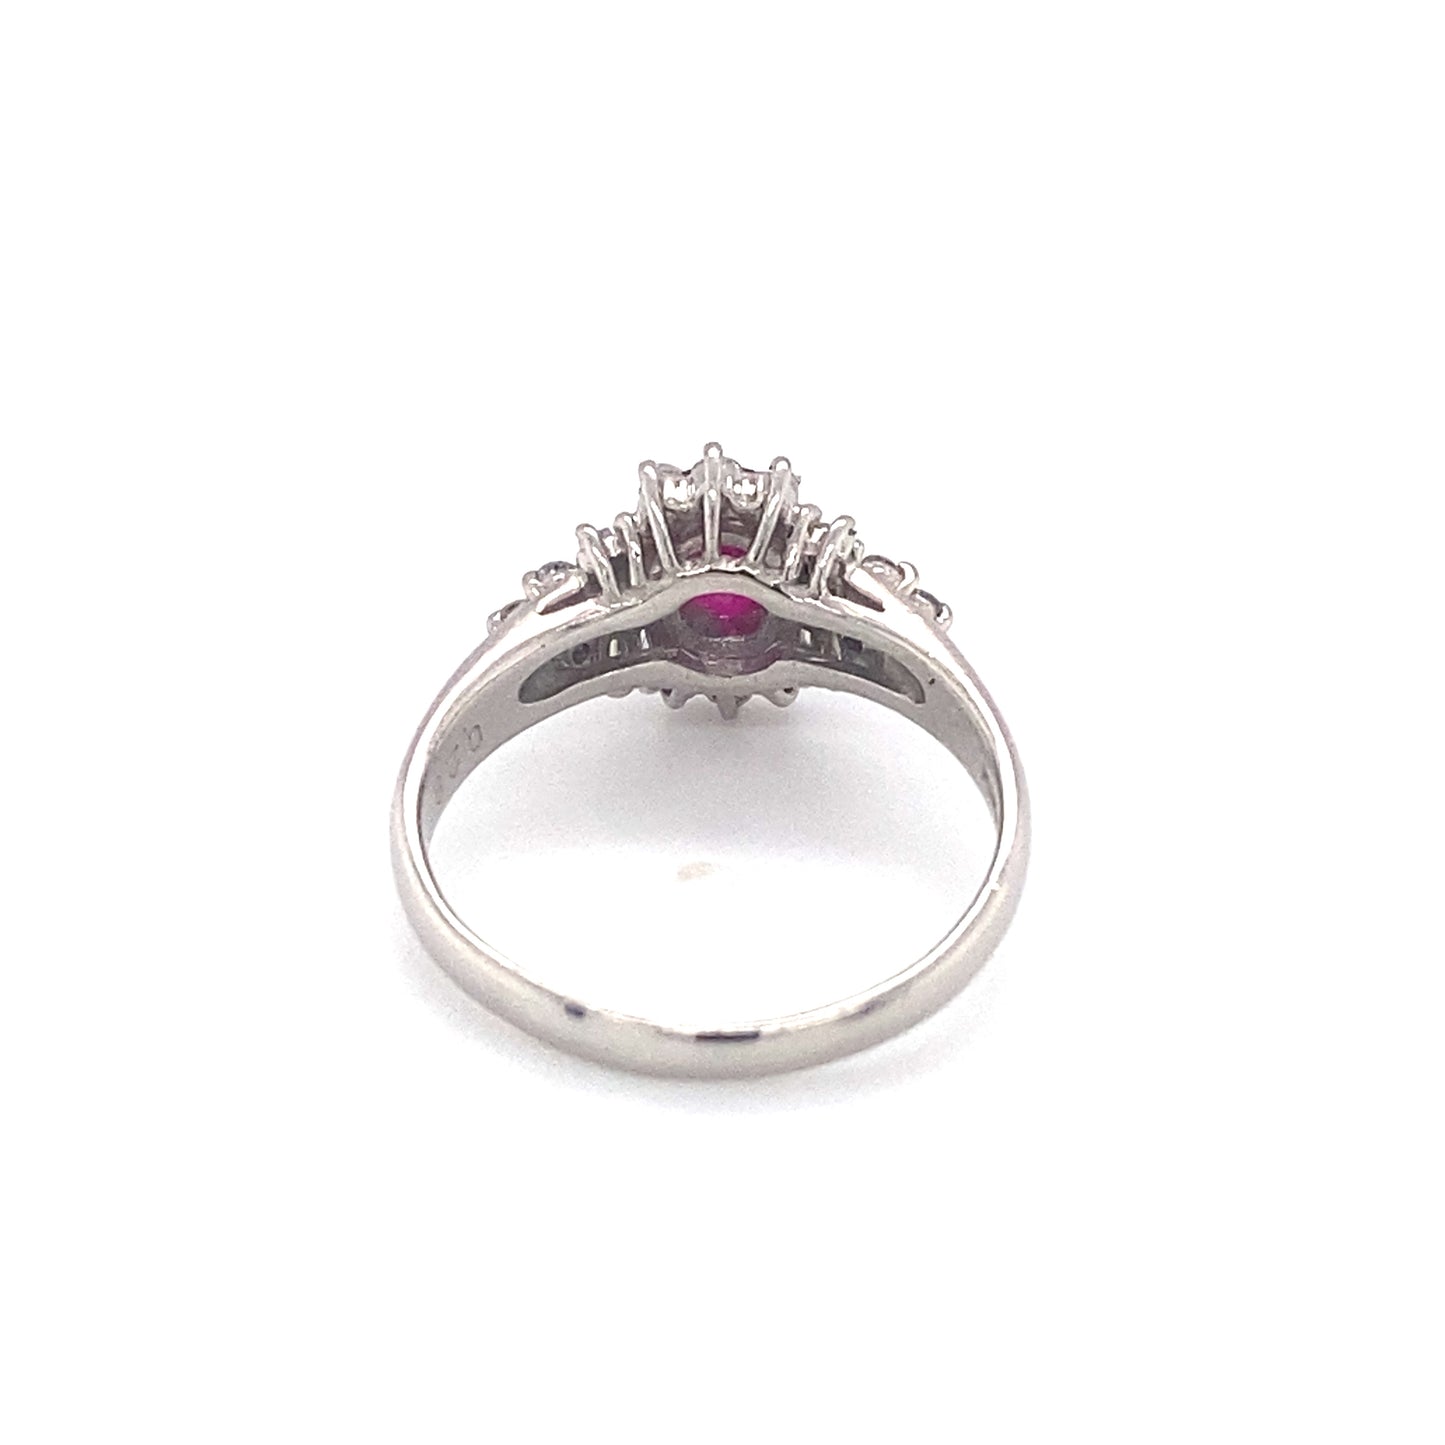 Circa 2000s 0.93ct Ruby and Diamond Engagement Ring in Platinum